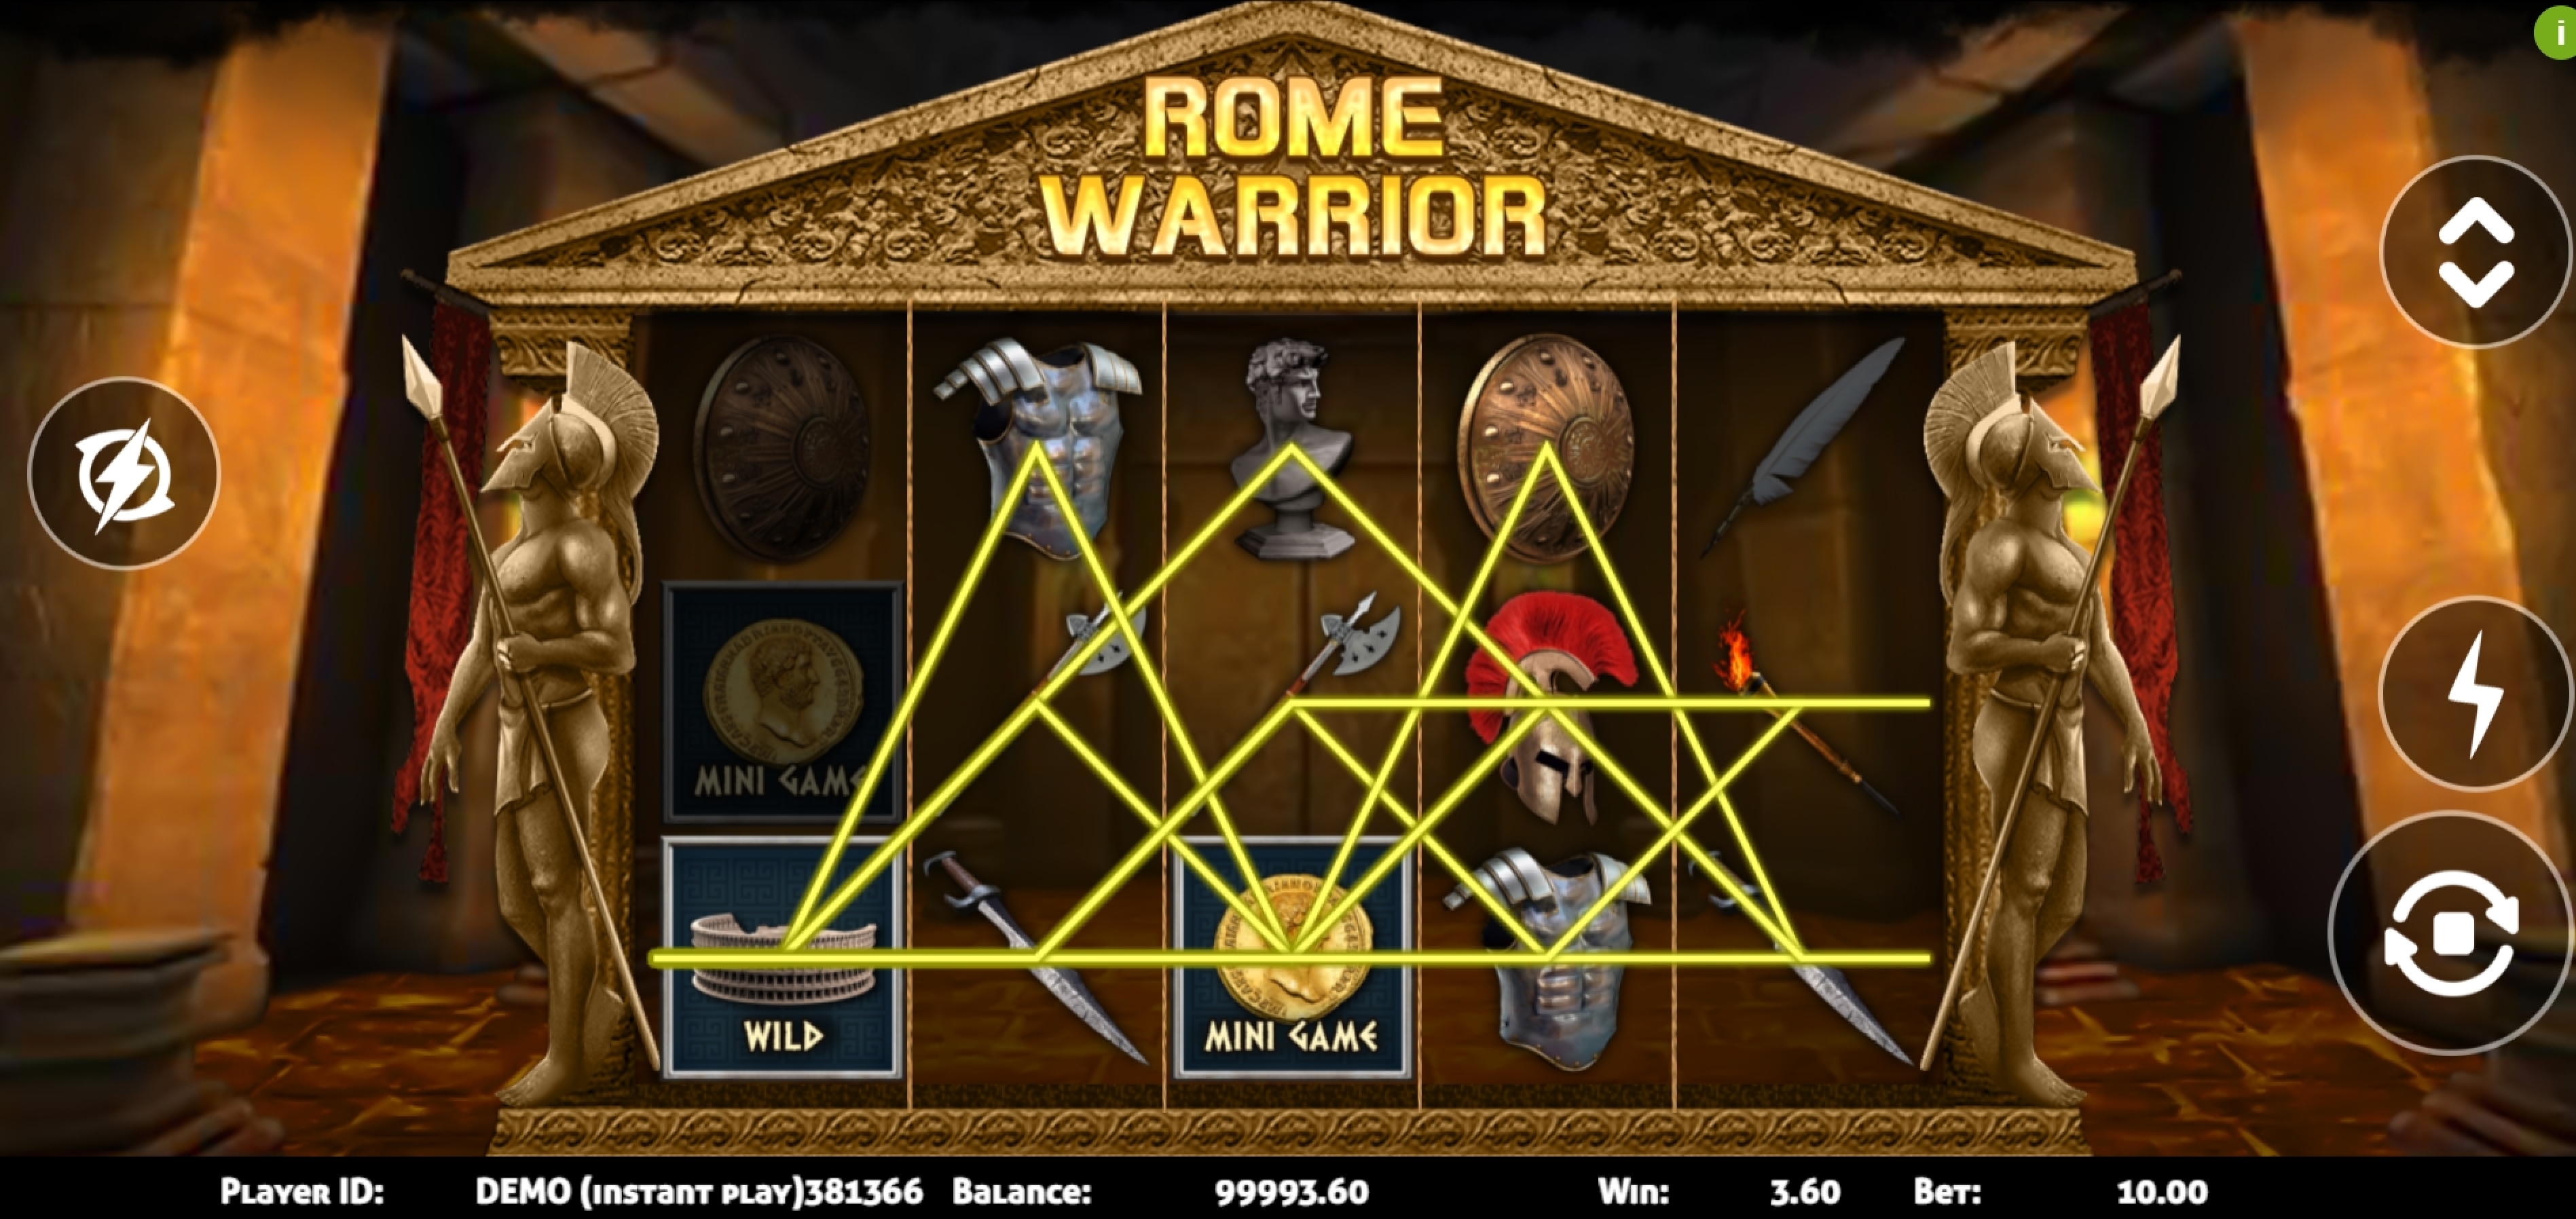 Win Money in Rome Warrior Free Slot Game by Triple PG